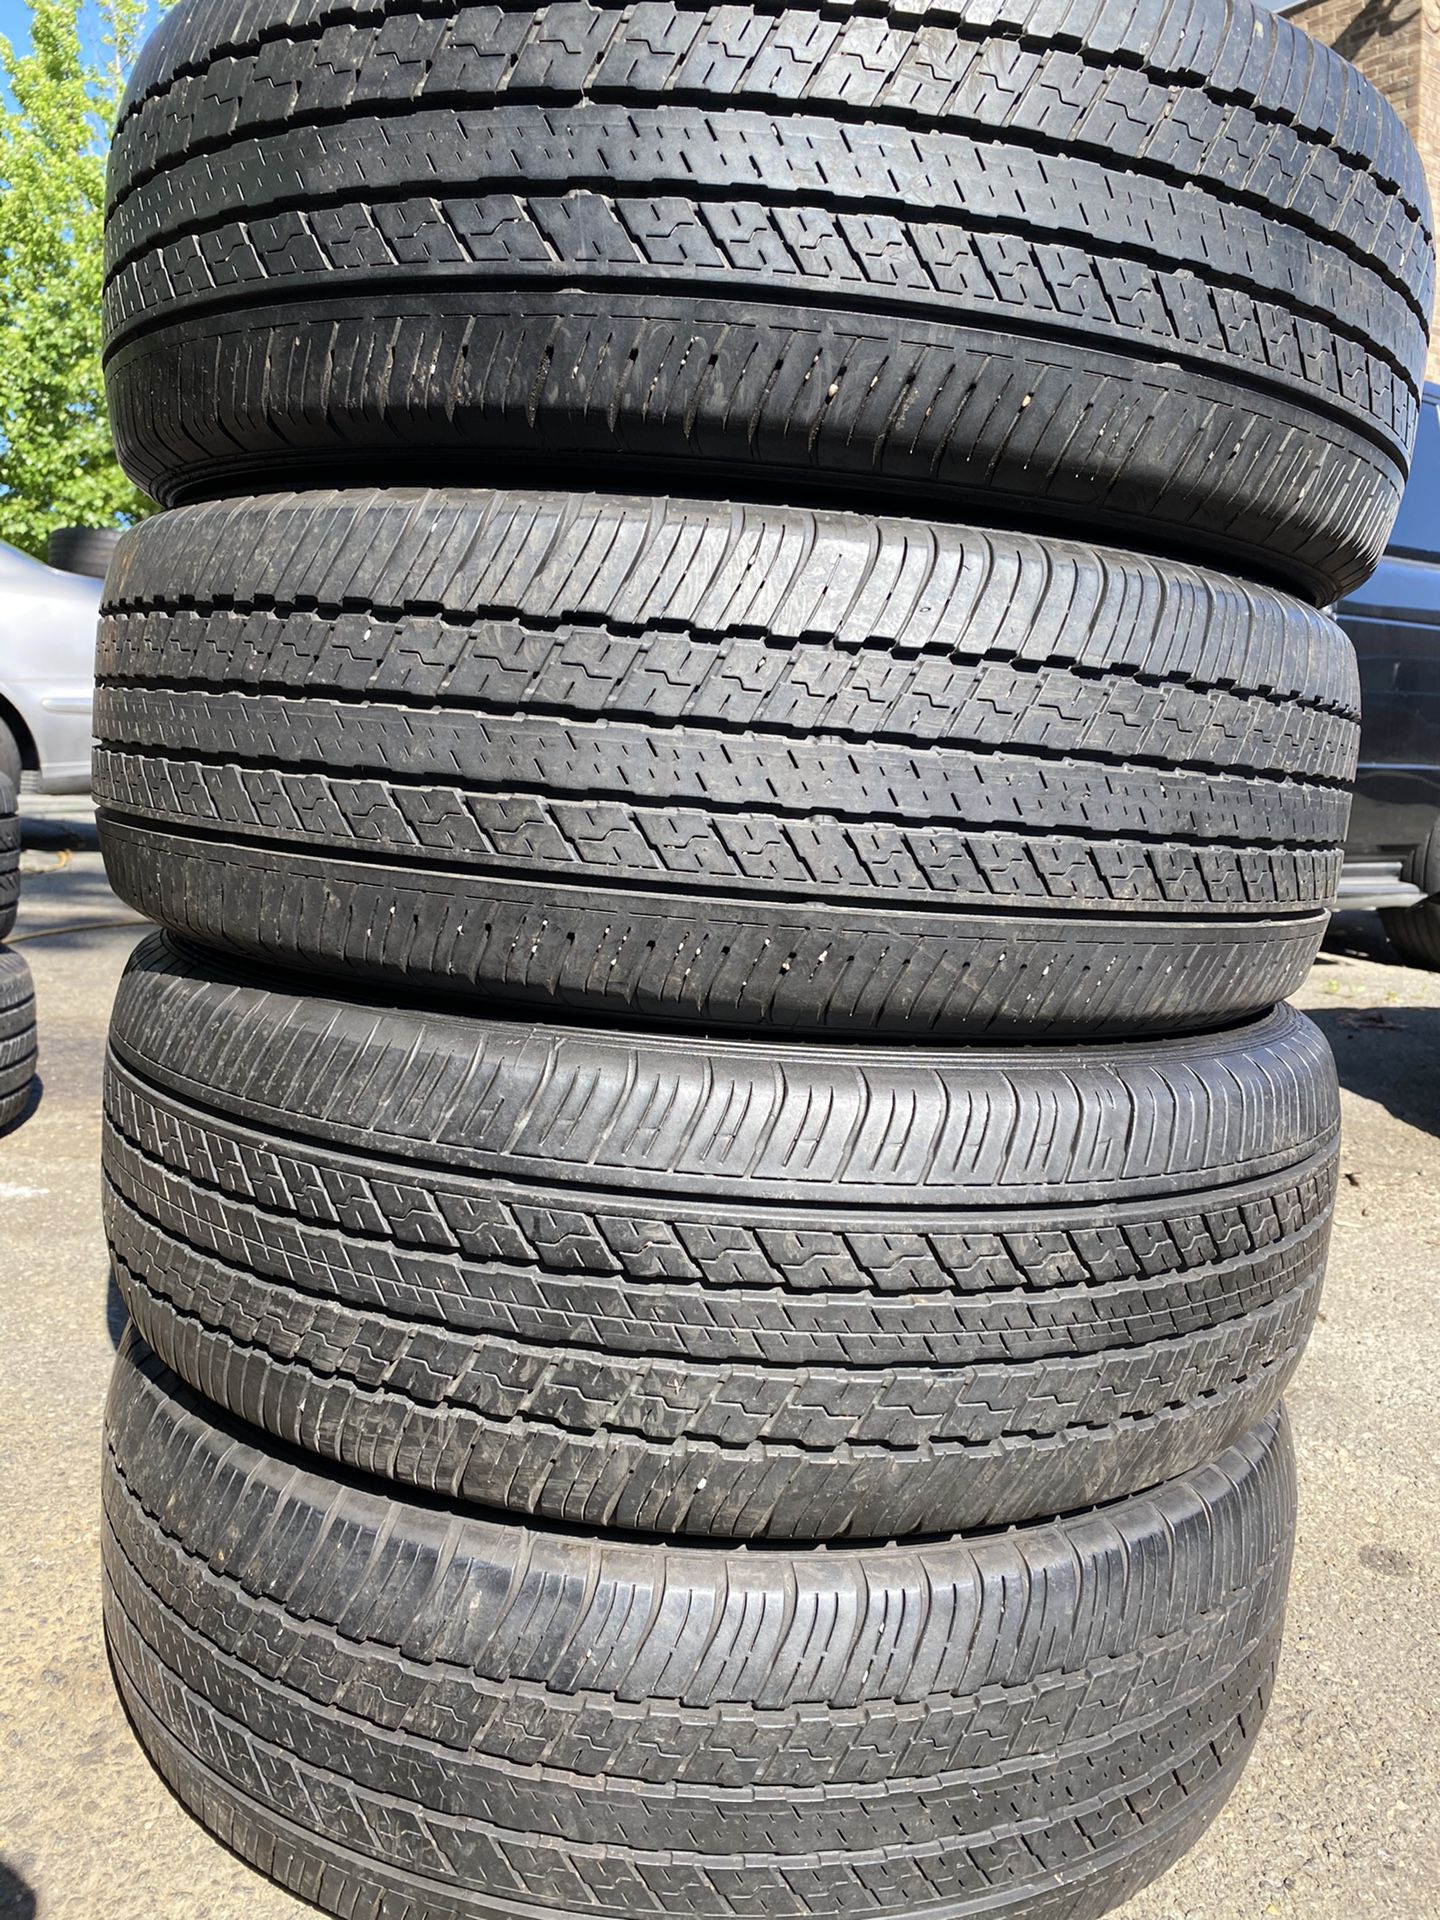 Set 4 usted tire 225/60R18 DUNLOP set 4 used tire $130